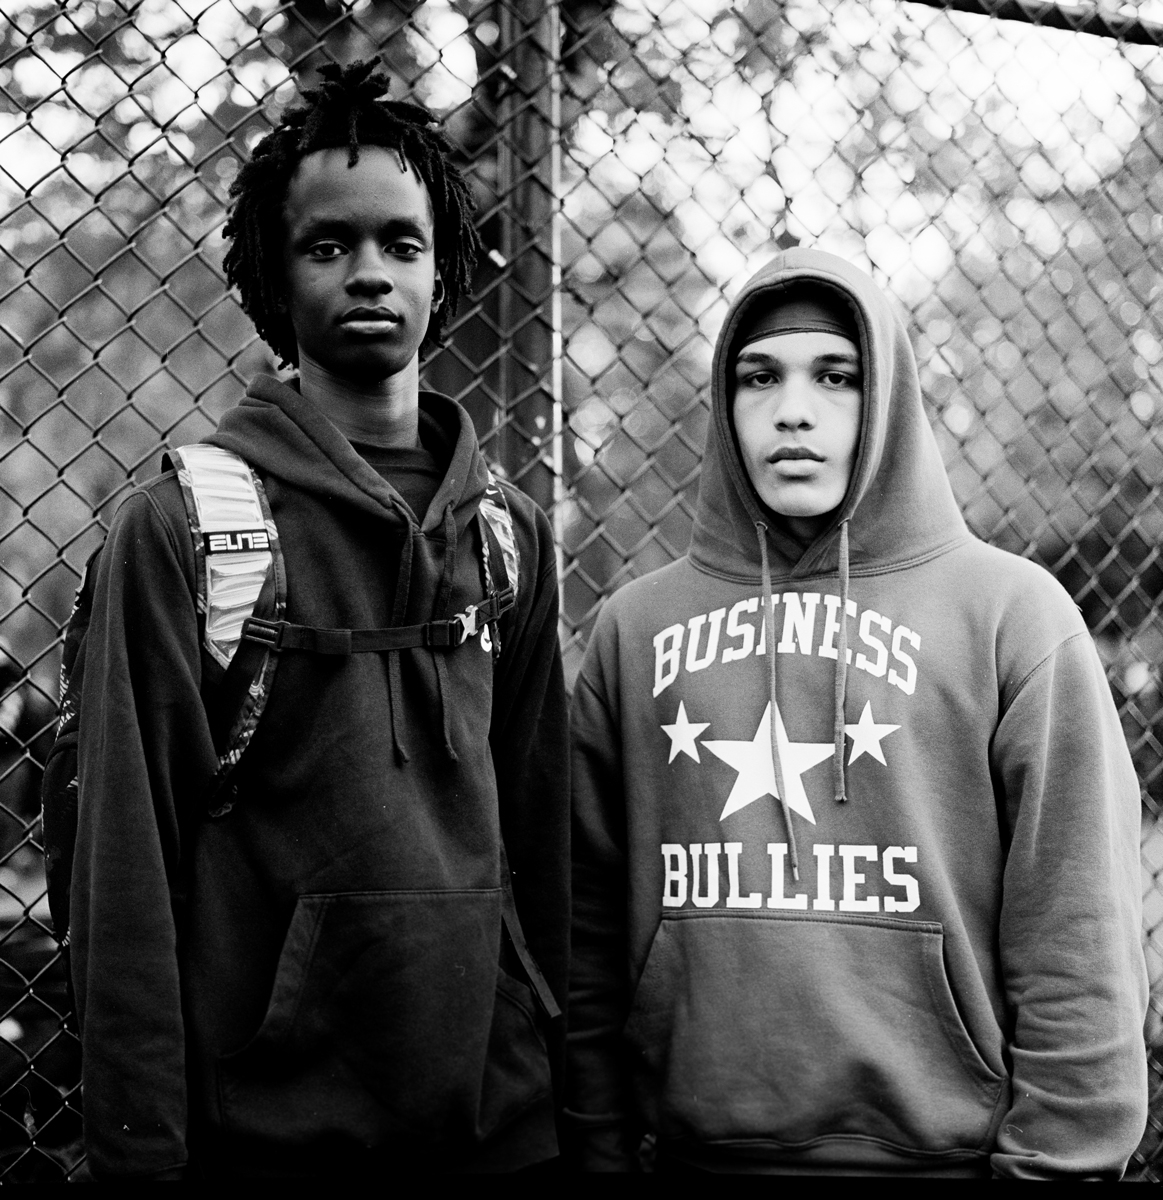 Two boys in front of the camera wearing hoodies